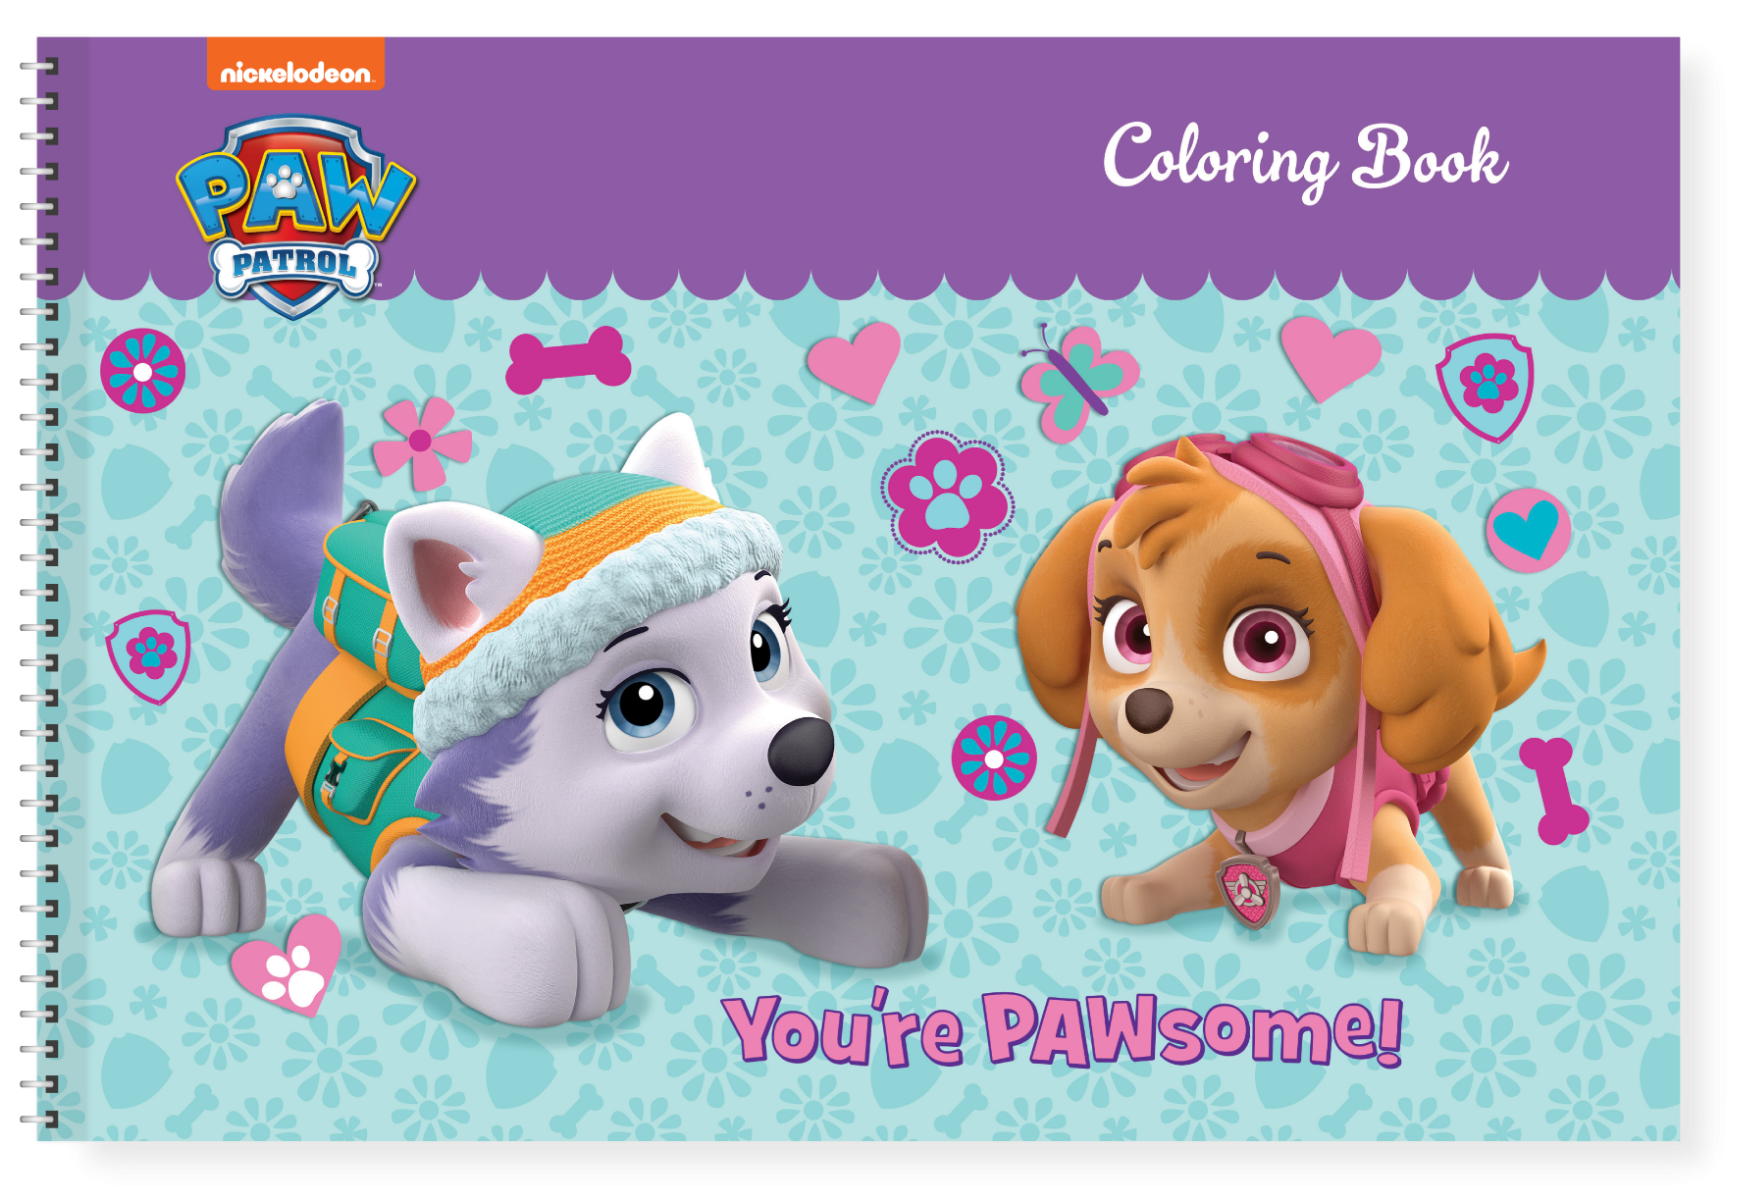 Nickelodeon paw patrol giant coloring book buy stationery online